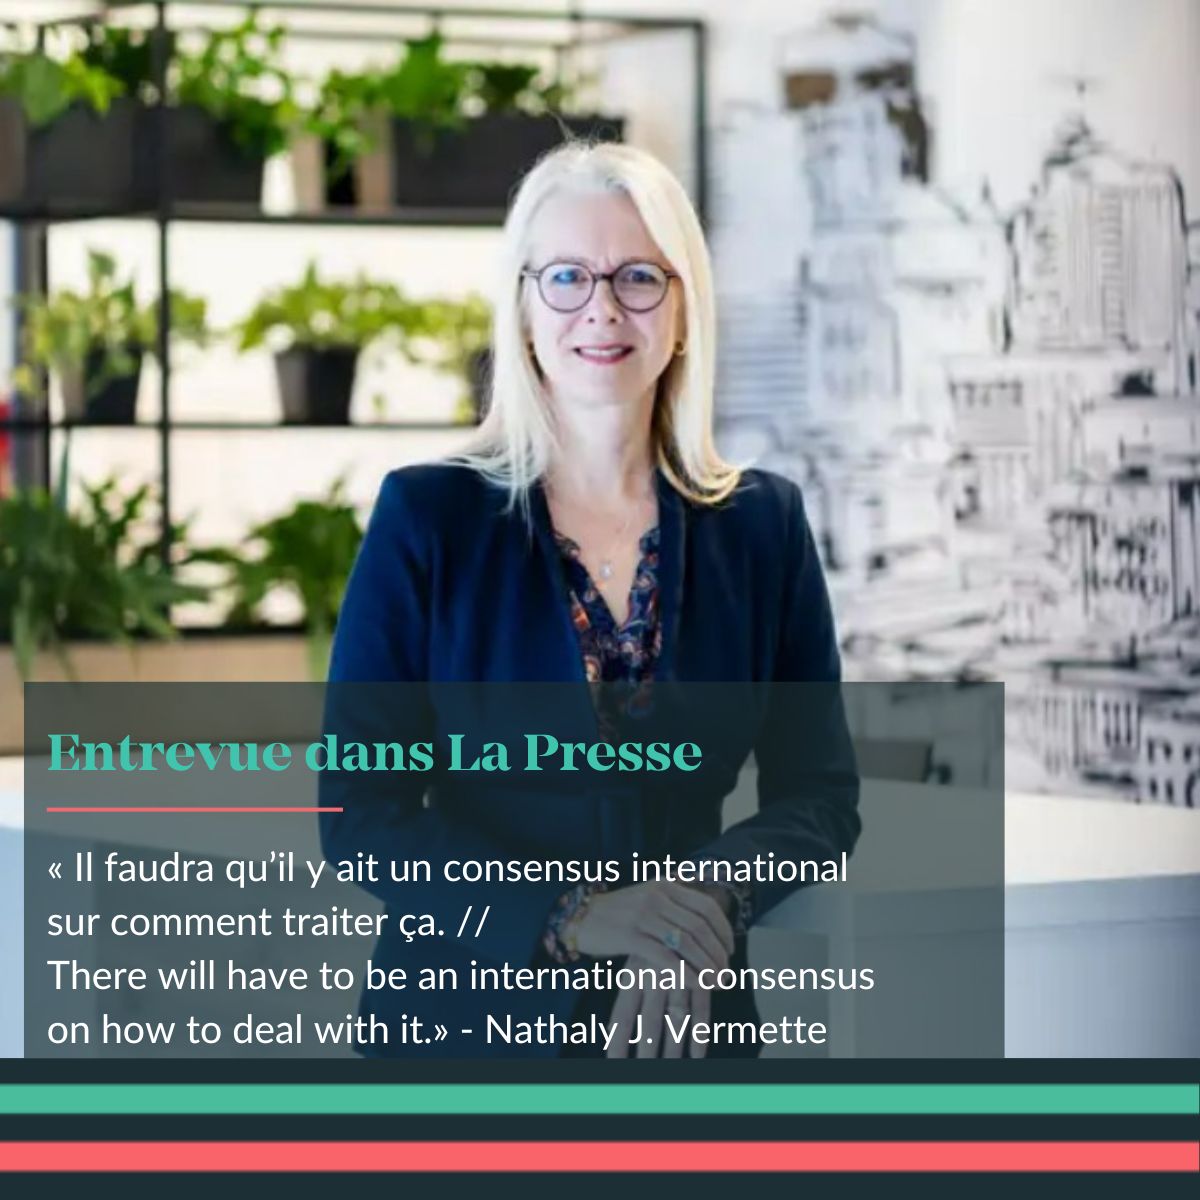 La Presse Business interview – Intellectual property in the age of artificial intelligence